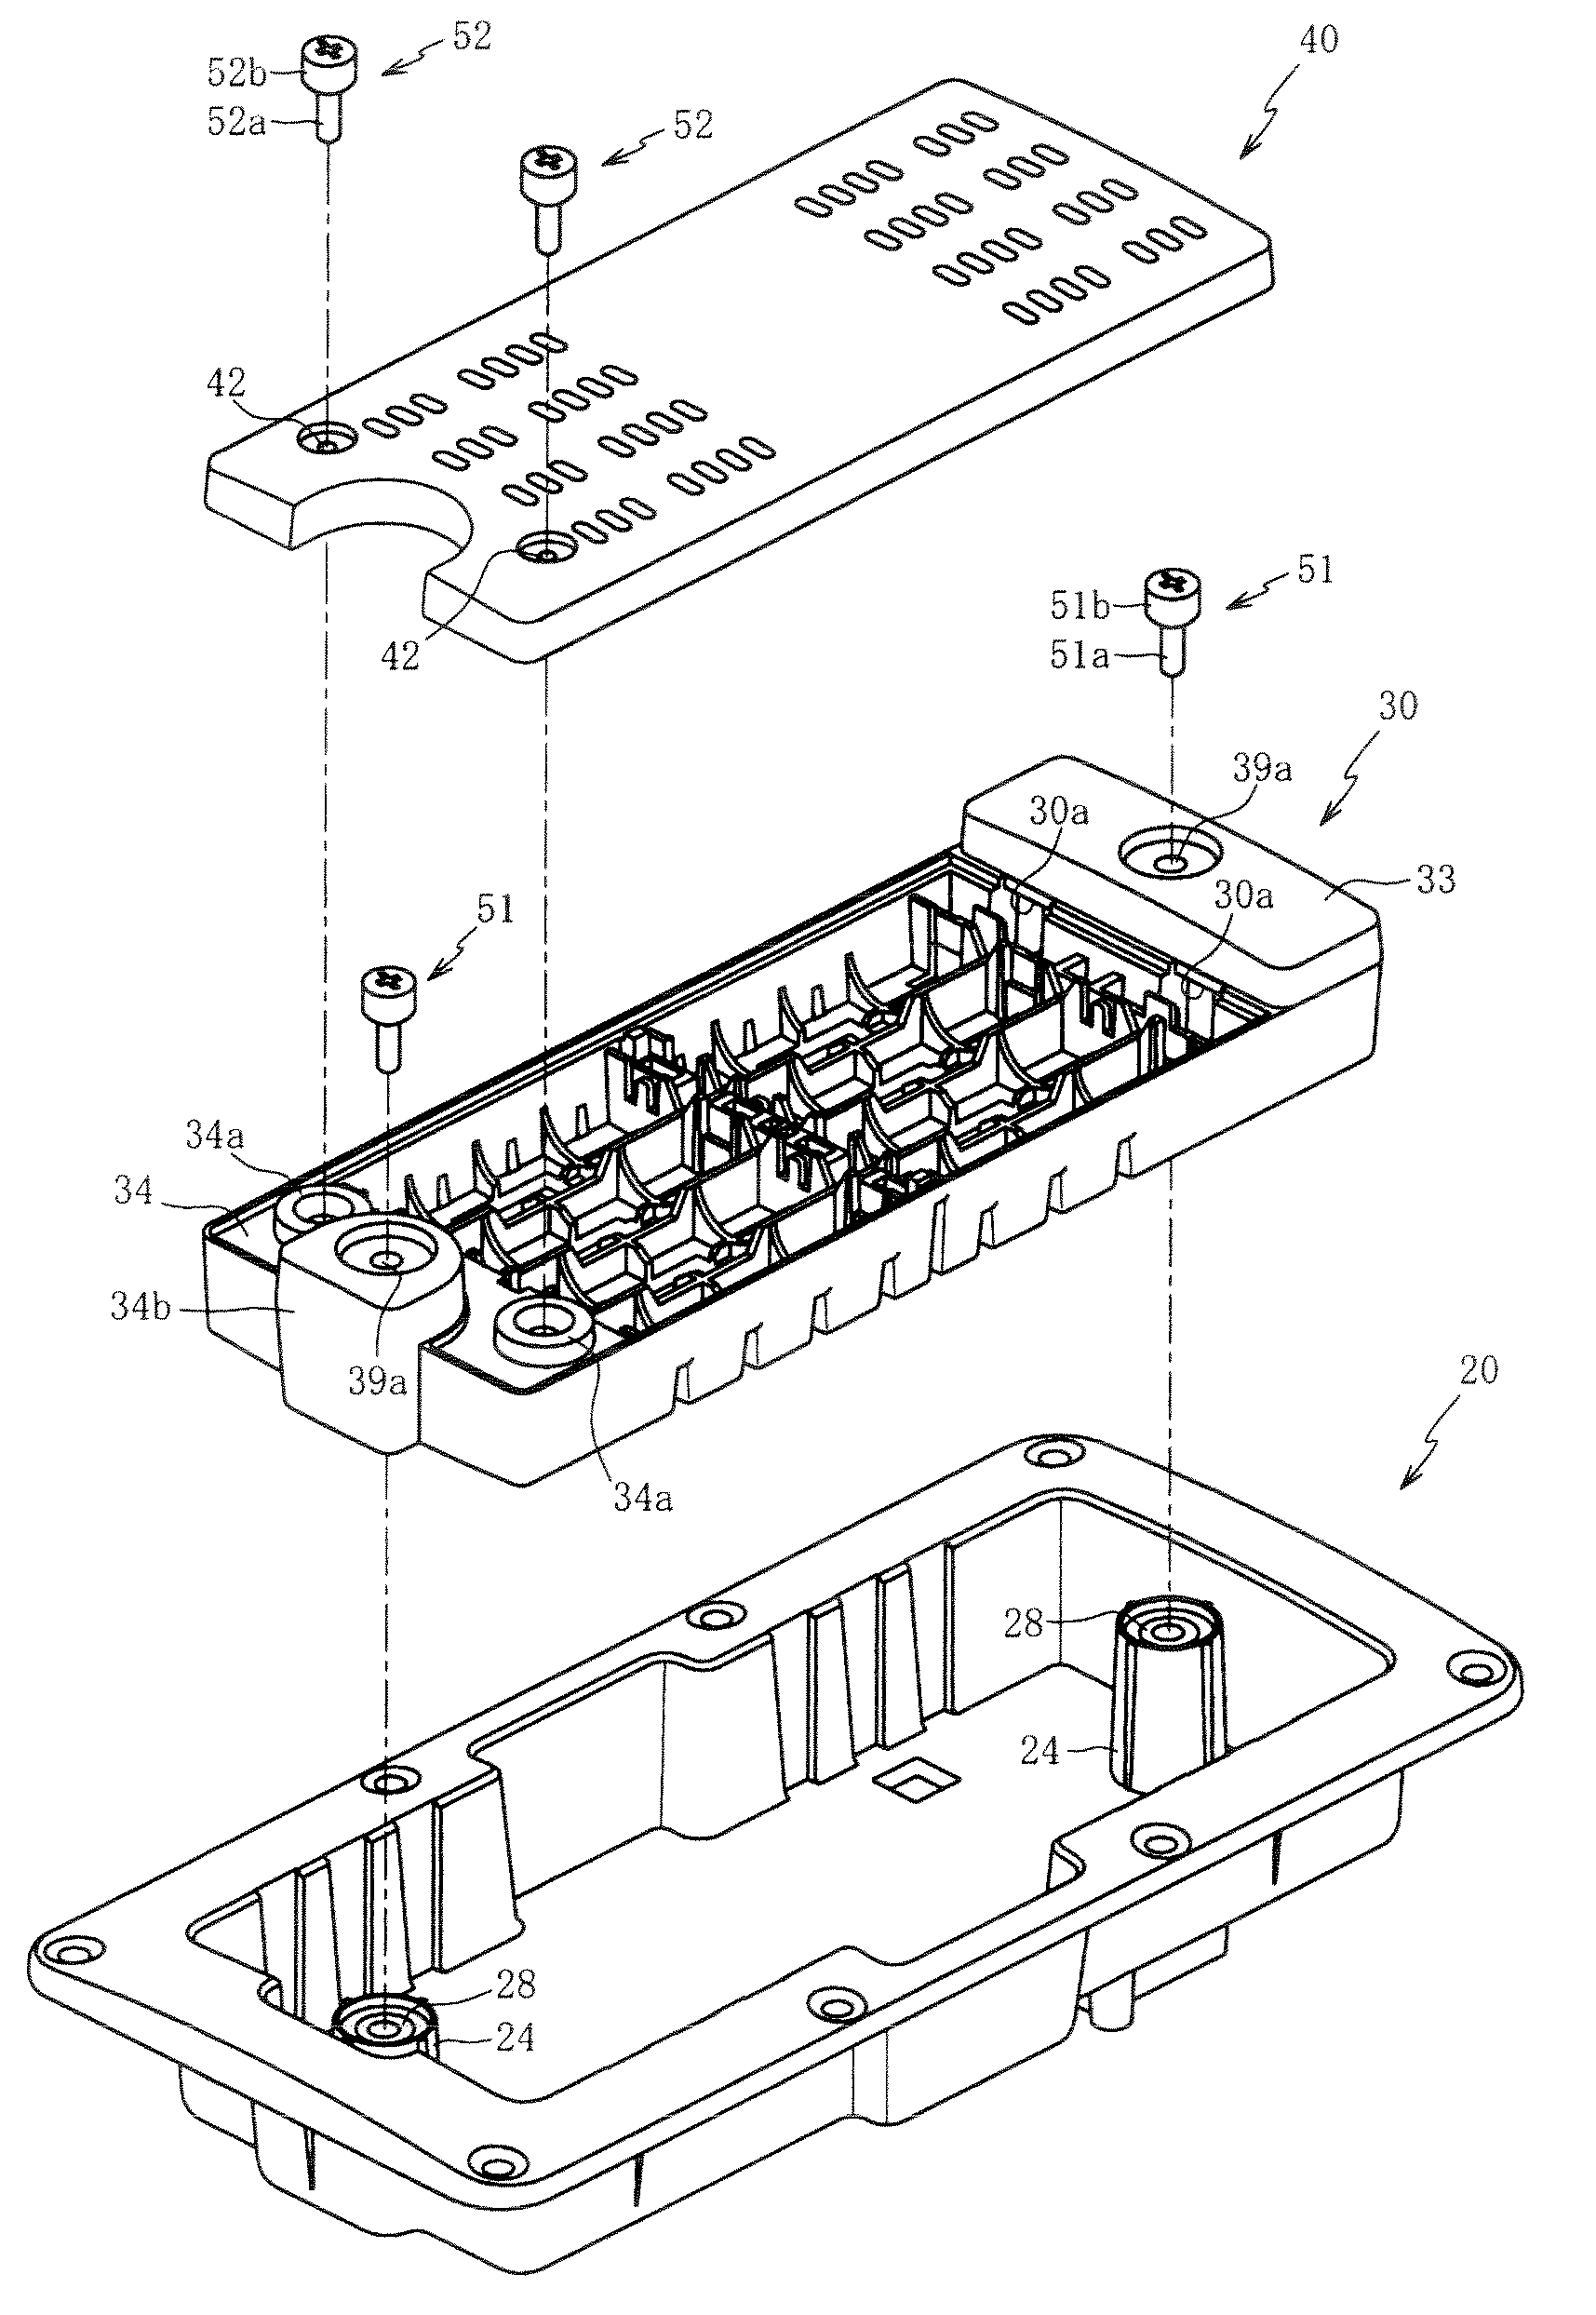 Battery storage structure for acoustic equipment